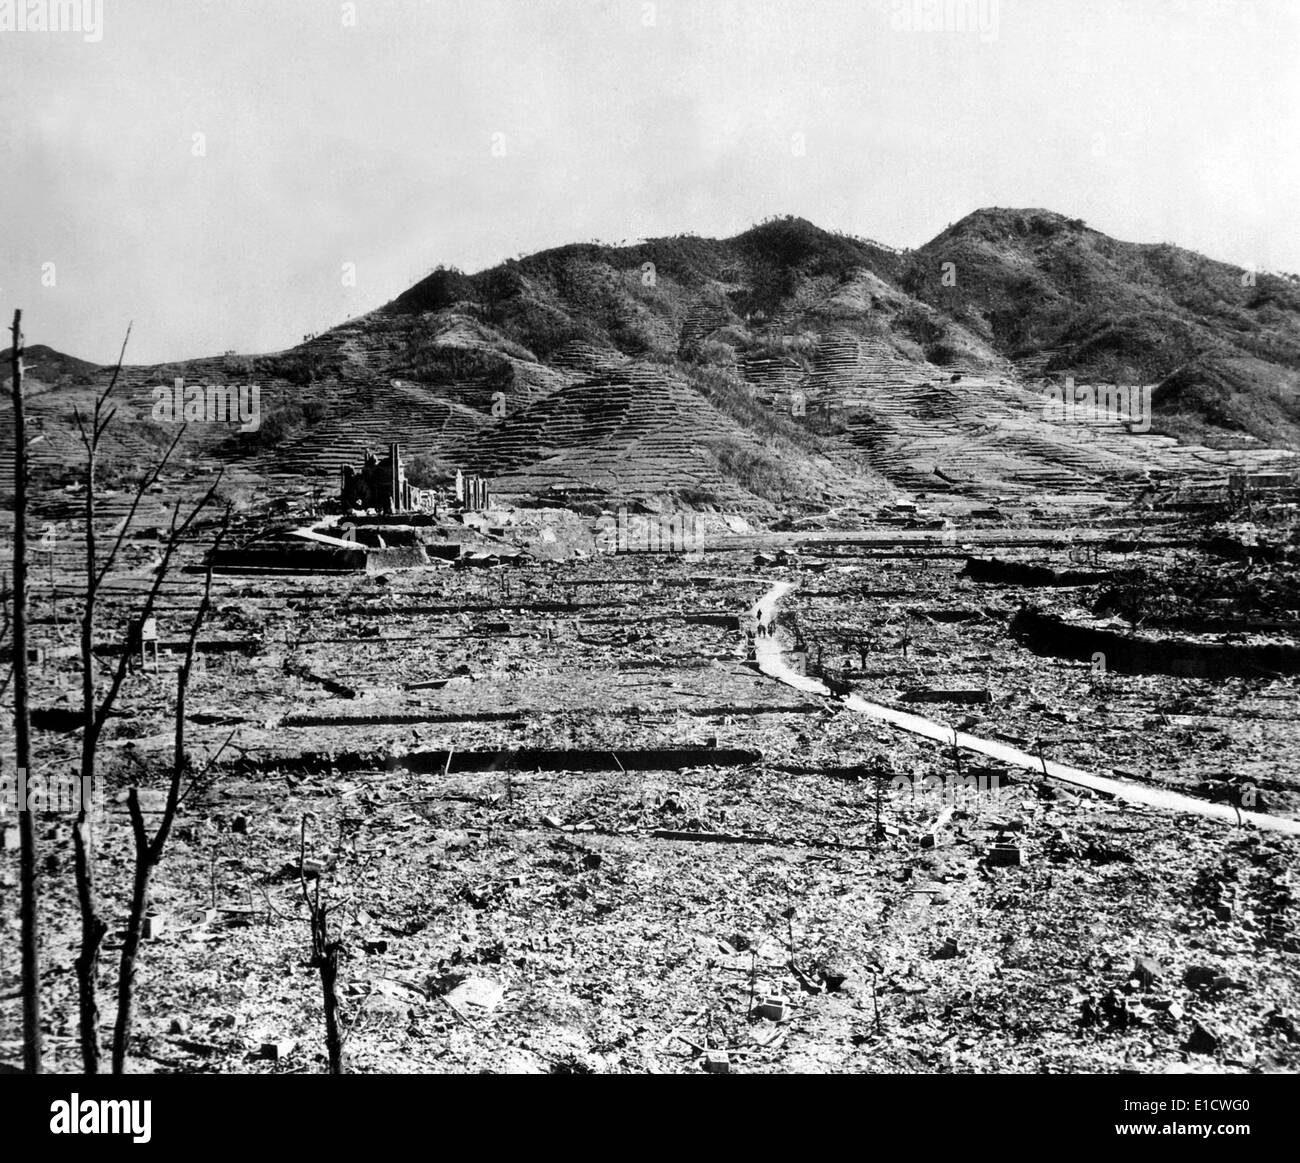 Ruins Of Nagasaki Japan After Atomic Bombing Of August 9 1945 A Roman Catholic Cathedral Is On The Distant Hill Ca Stock Photo Alamy